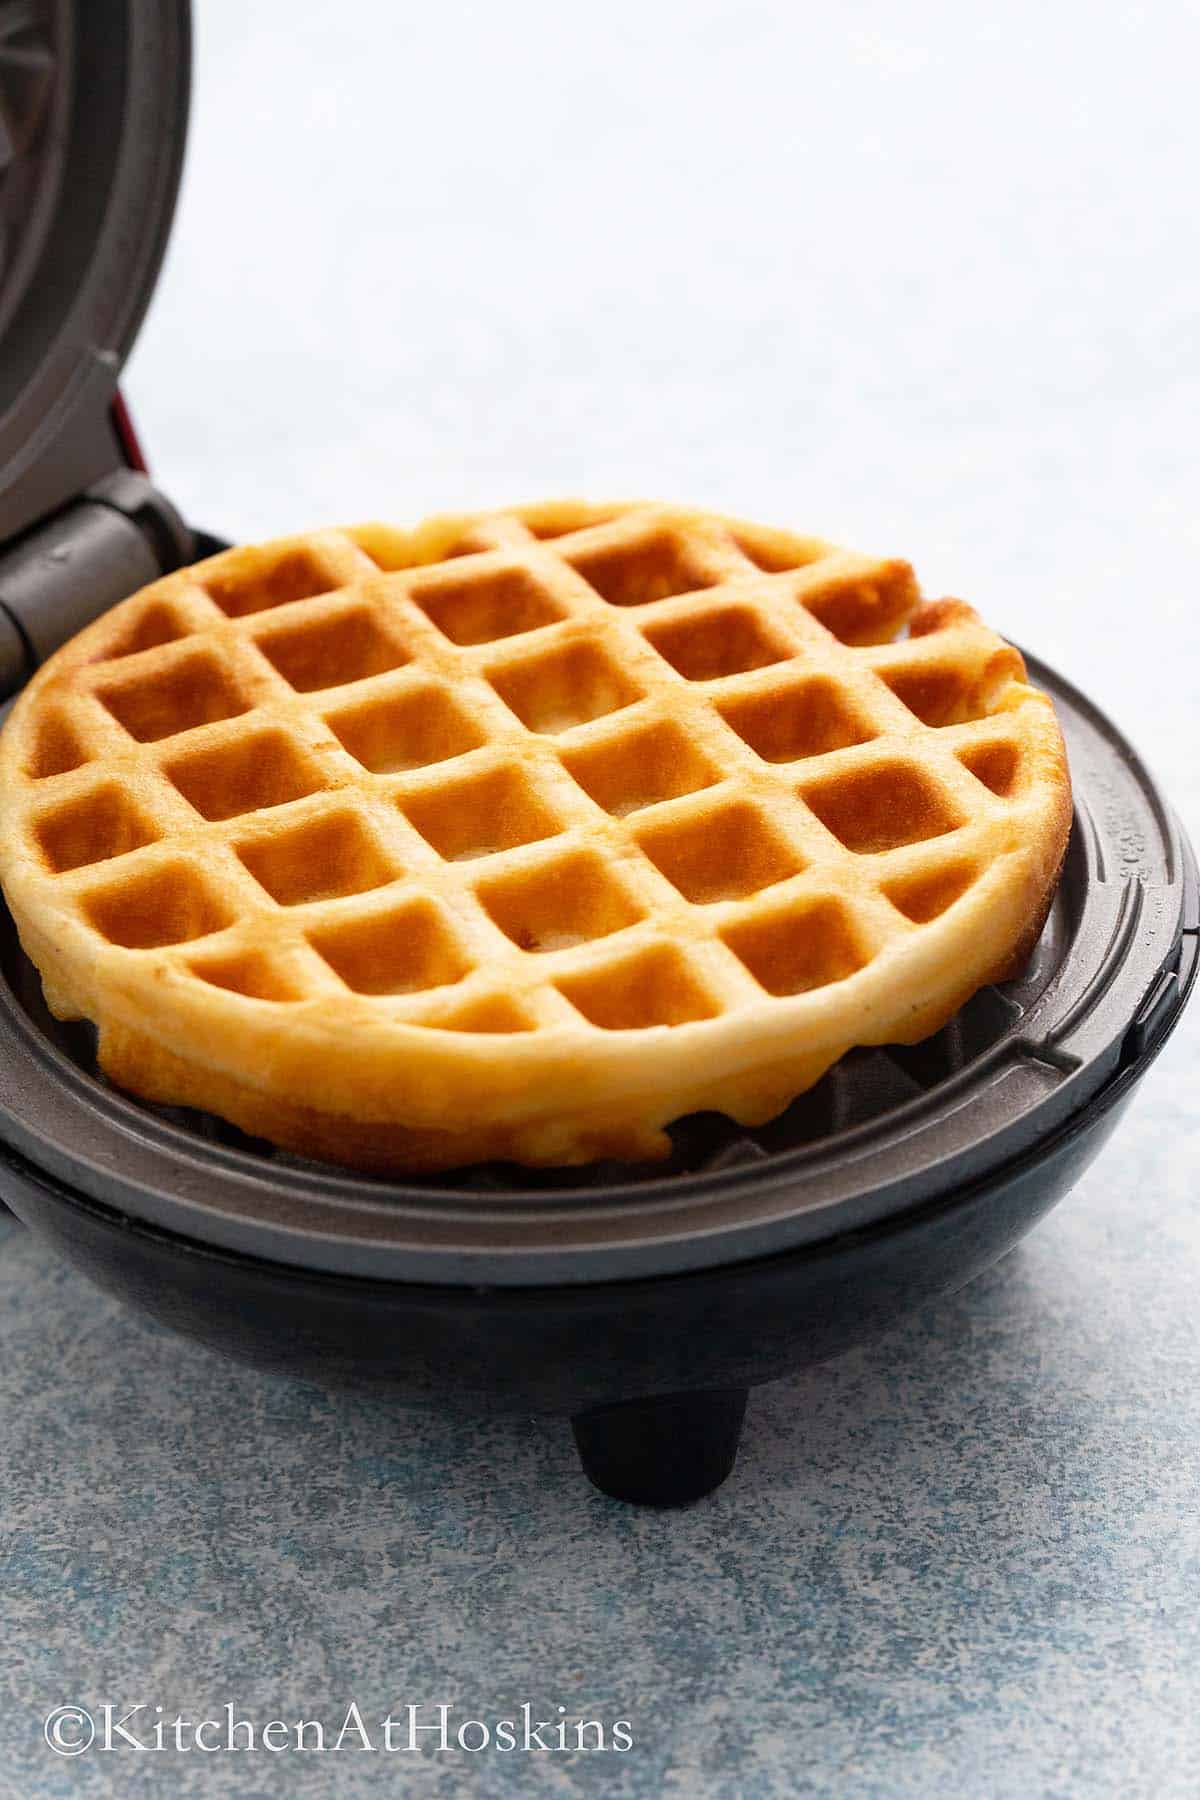 a hot cooked waffle on a dash waffle maker.